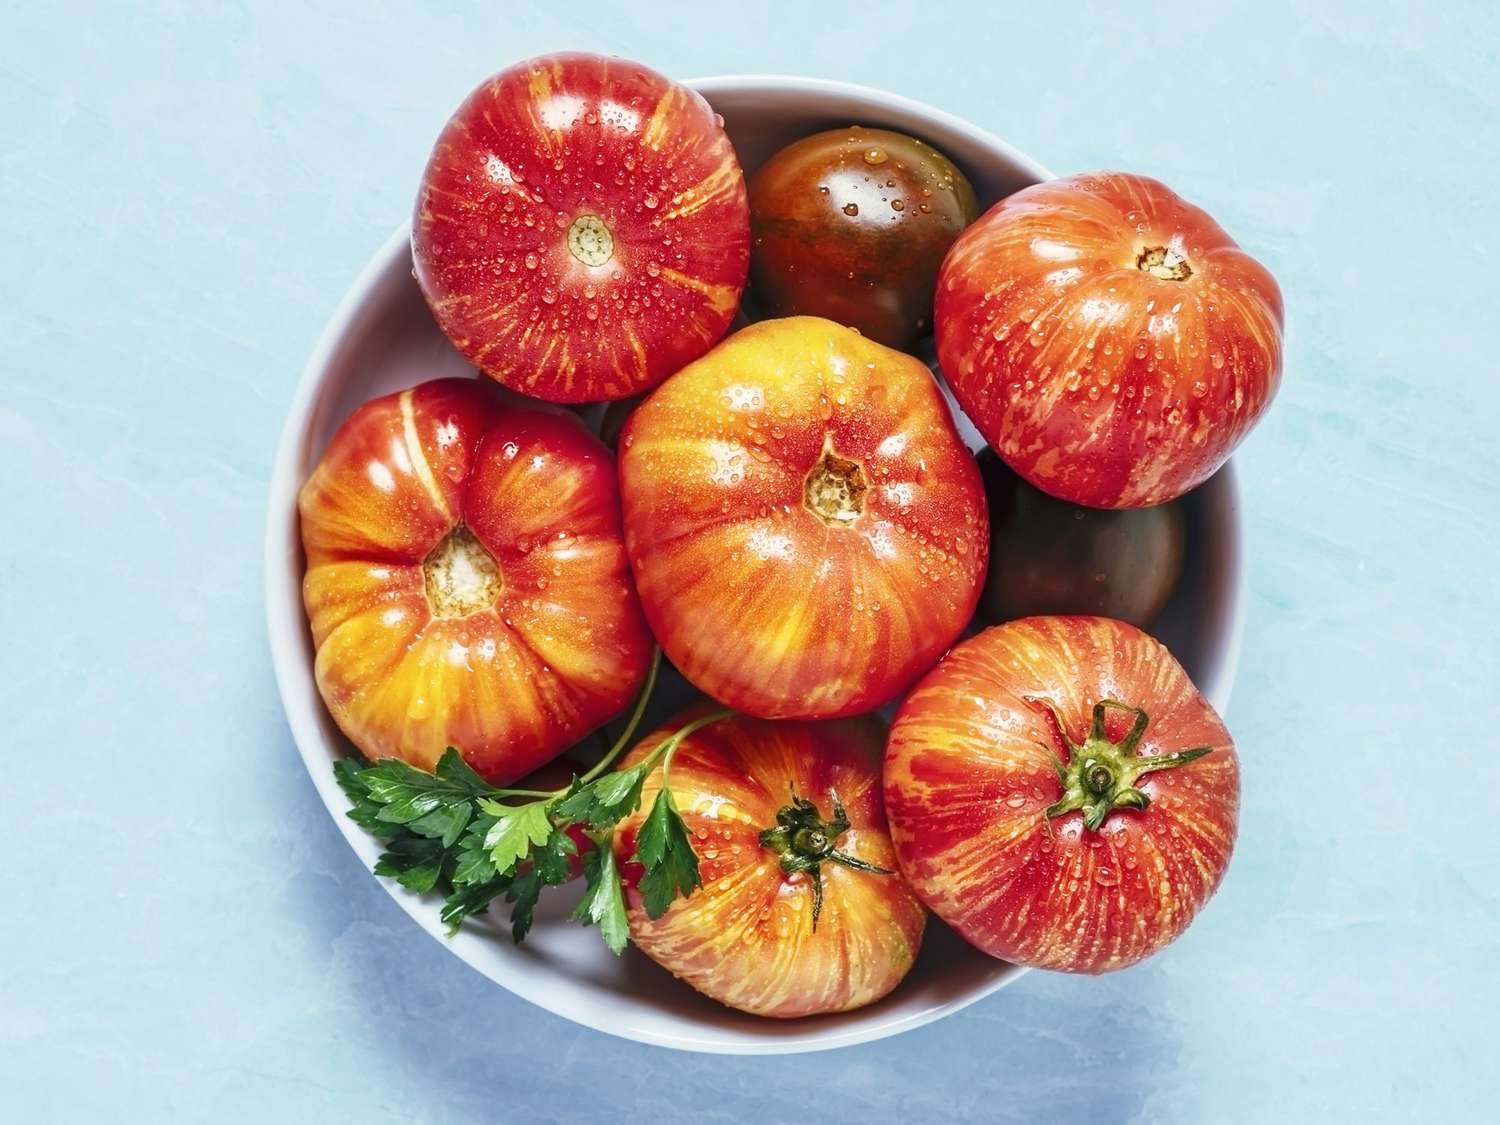 Bowl of heirloom tomatoes on blue background